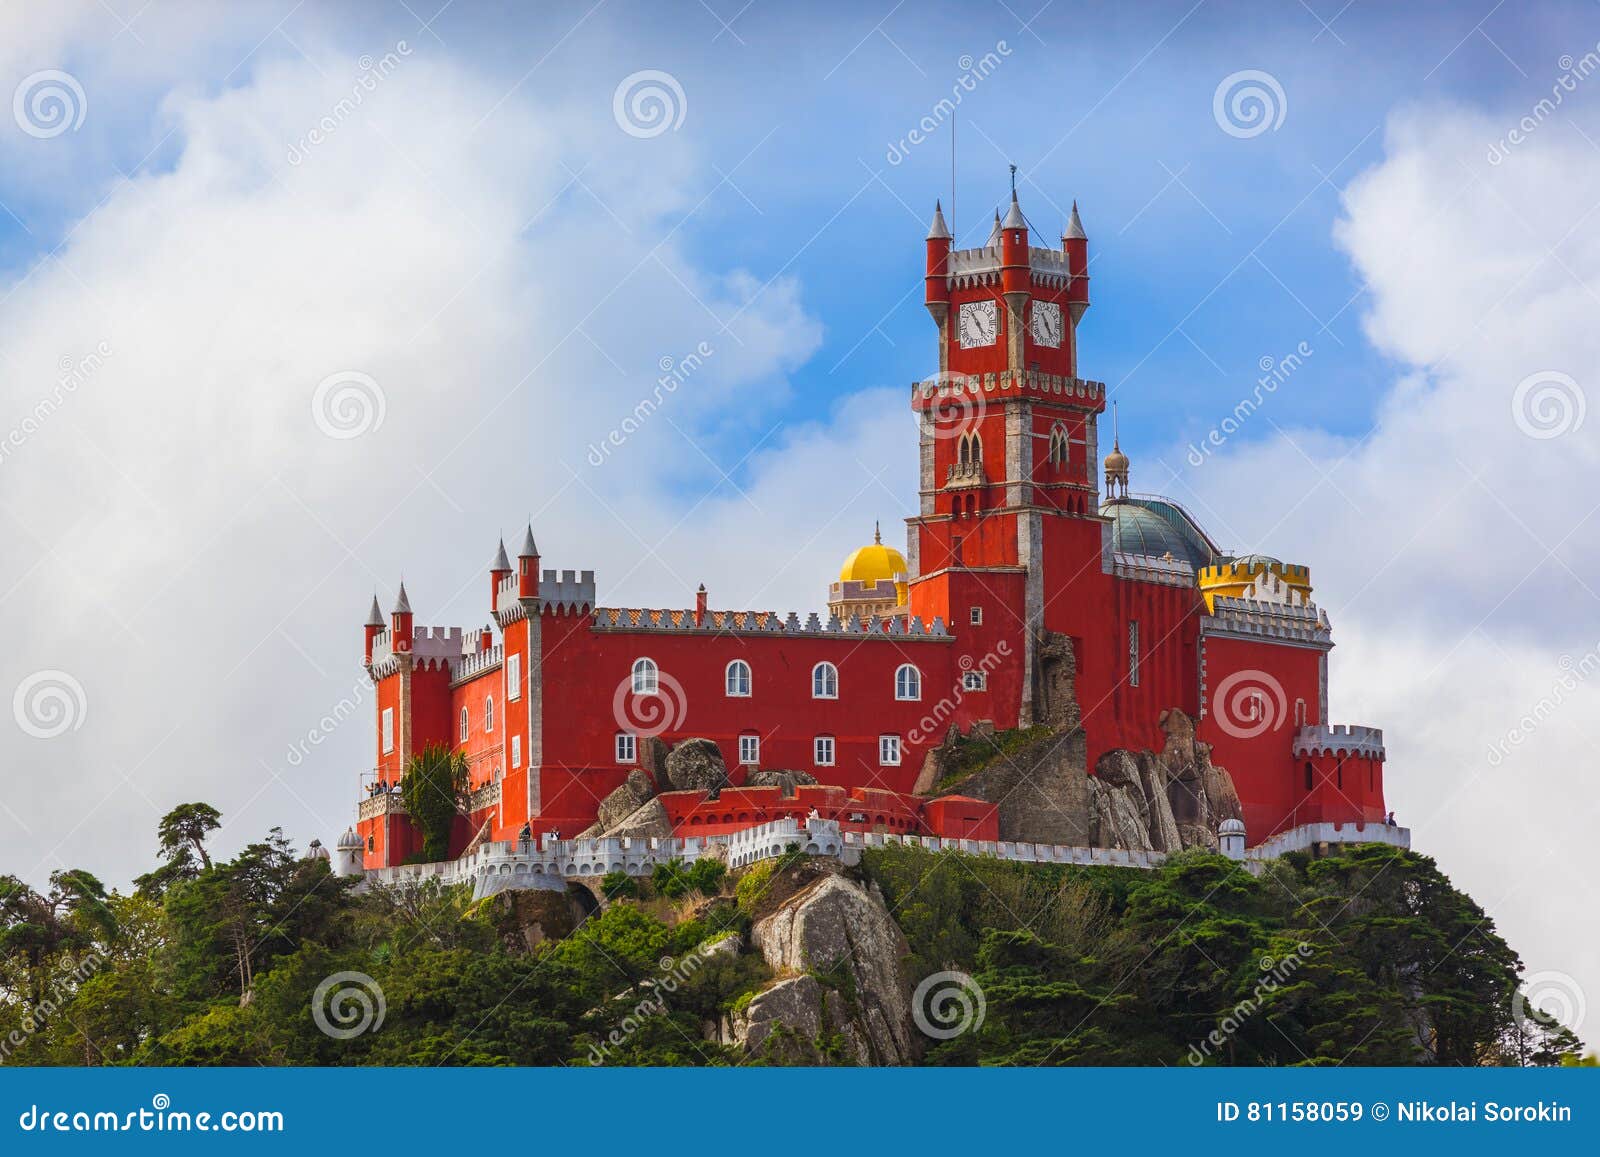 pena palace in sintra - portugal